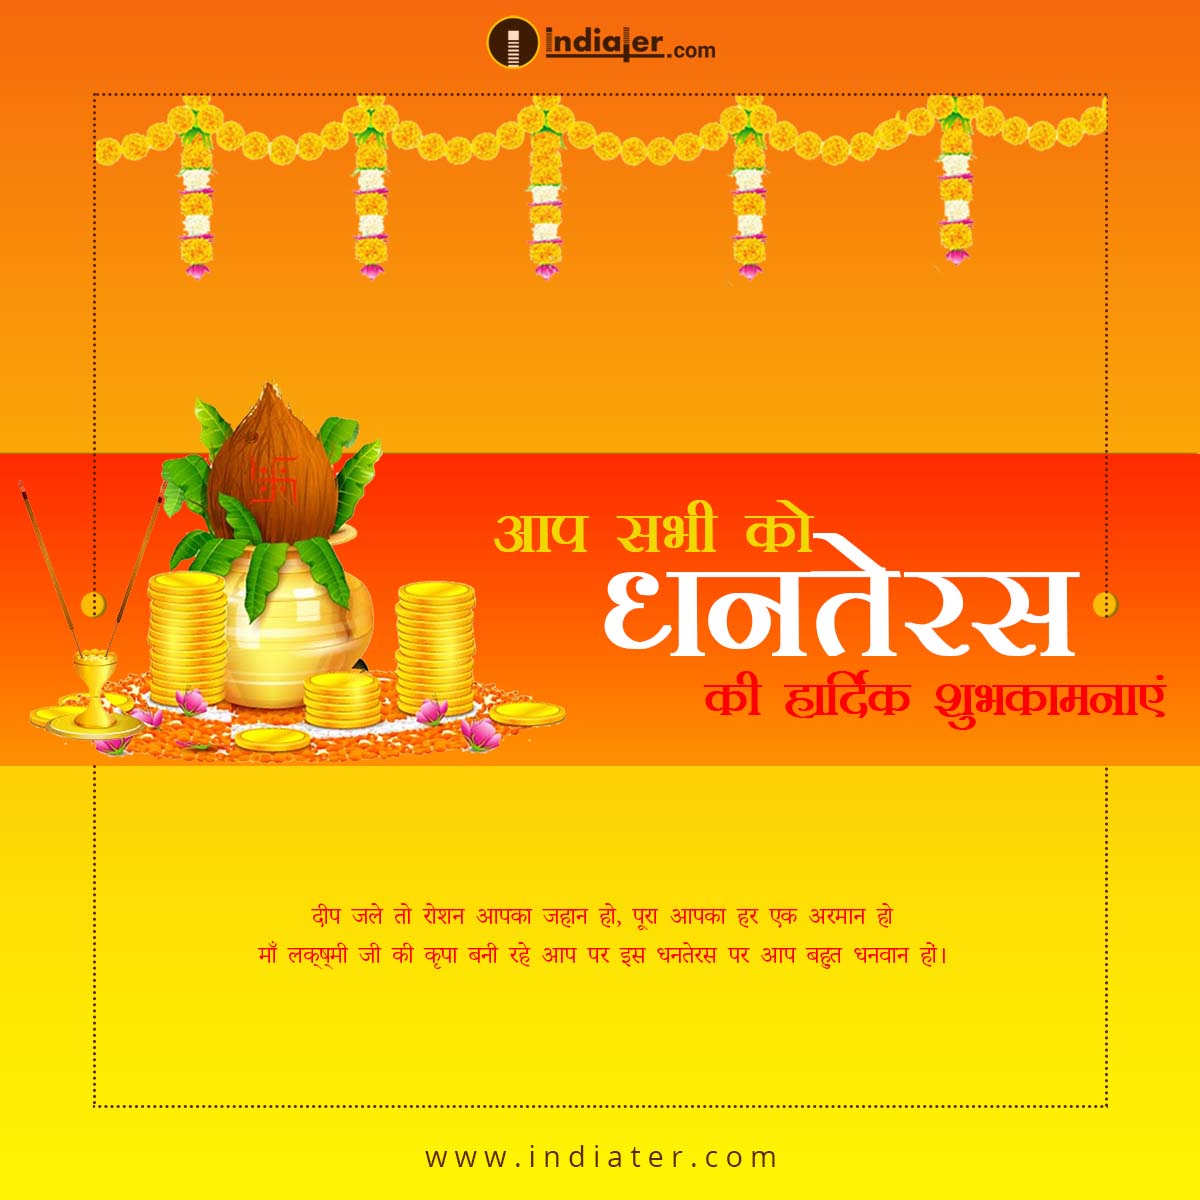 happy-dhanteras-wishes-in-hindi-greetings-free-download